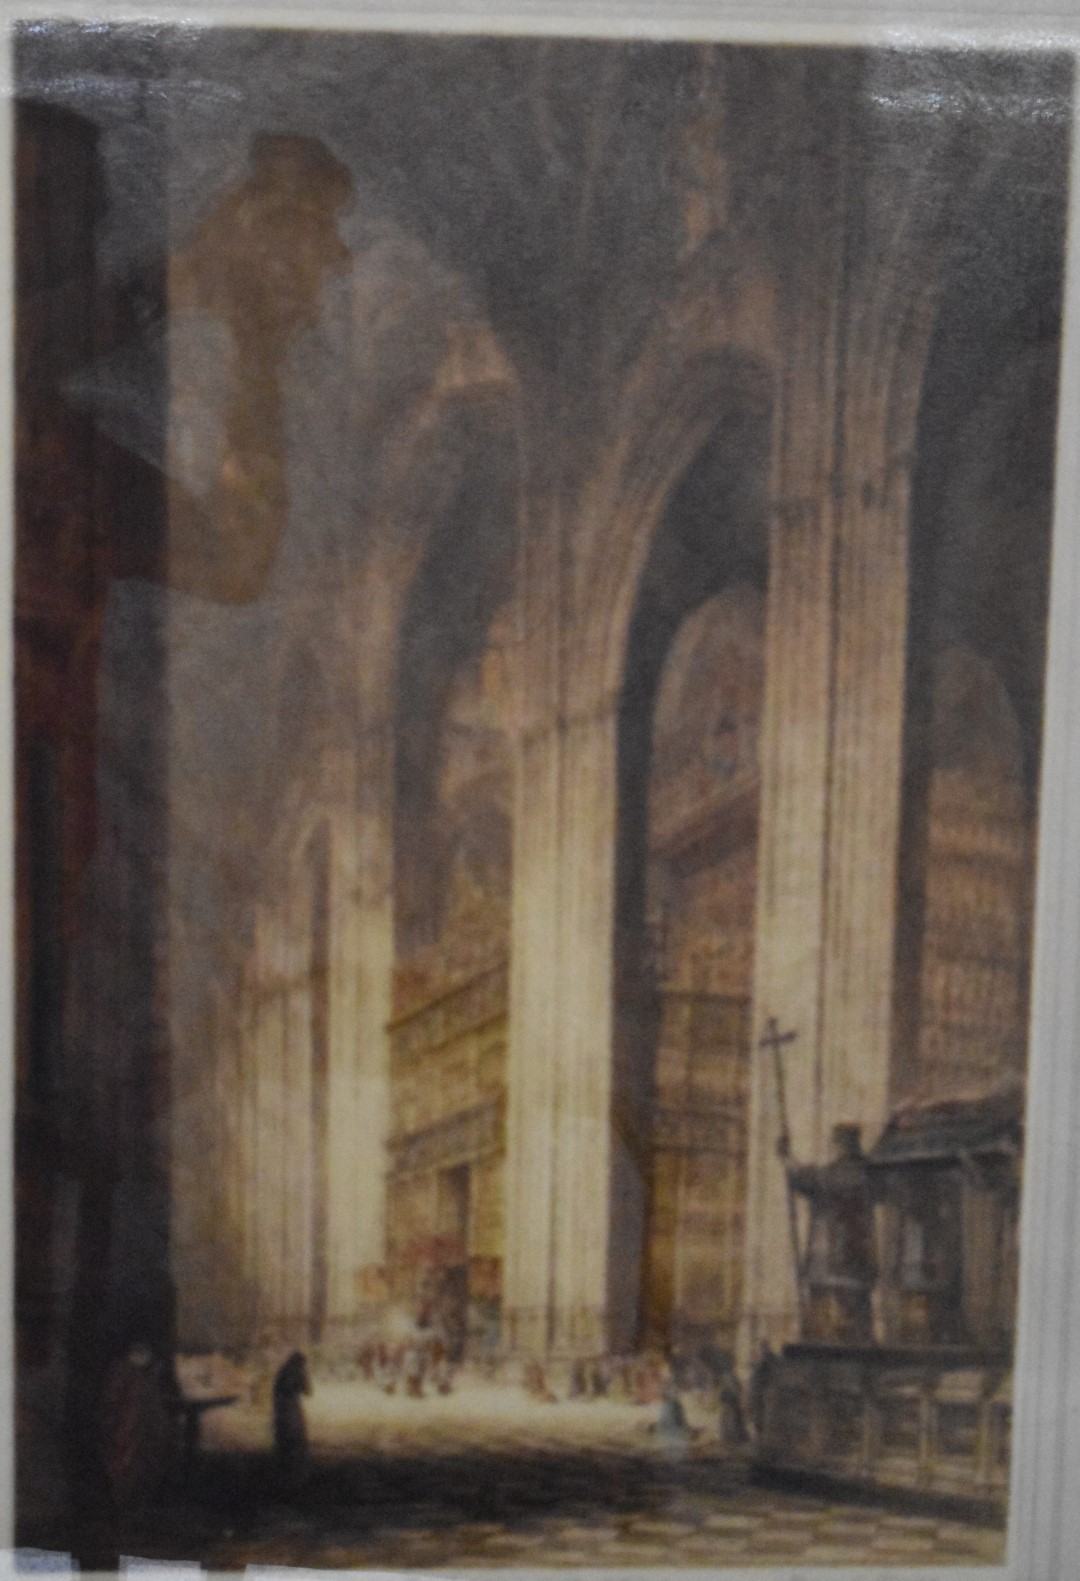 J Alphege Brewer, three etchings, two interior scenes of cathedrals including Seville and Toledo, - Image 4 of 18